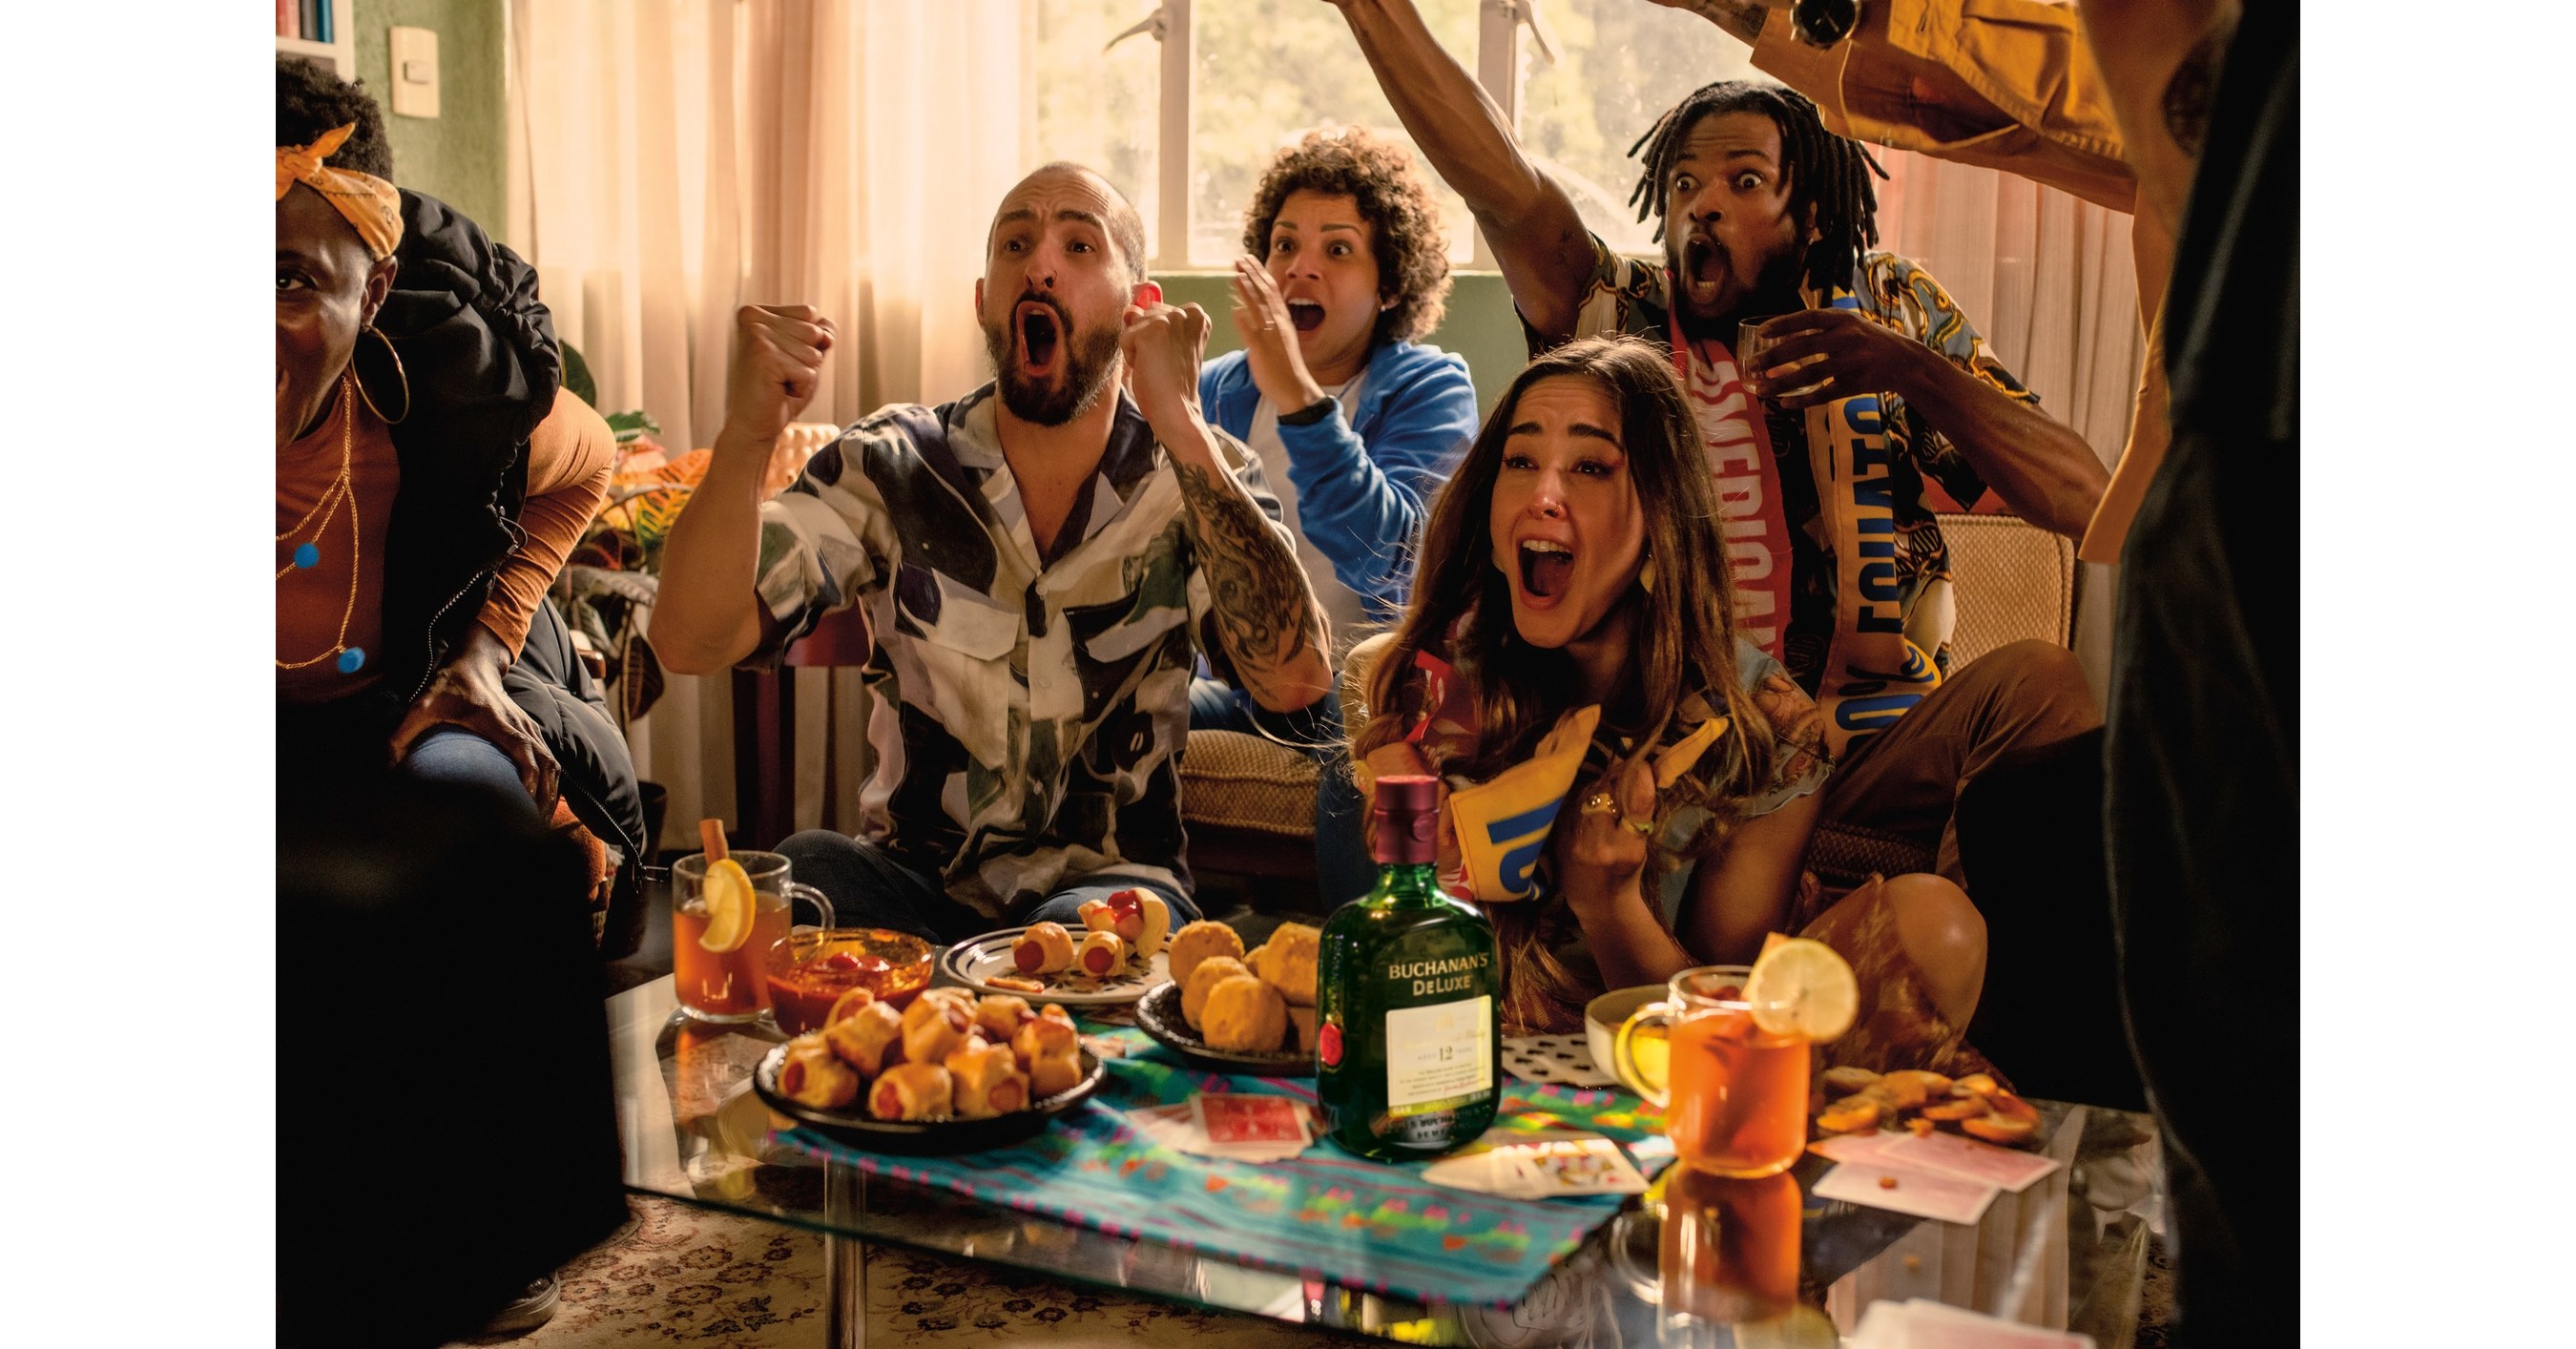 BUCHANAN'S SCOTCH WHISKY LAUNCHES NATIONAL CAMPAIGN INVITING FANS TO  CELEBRATE THEIR 100% LATINO, 100% AMERICAN DUALITY DURING THE WORLD'S  LARGEST FÚTBOL EVENT